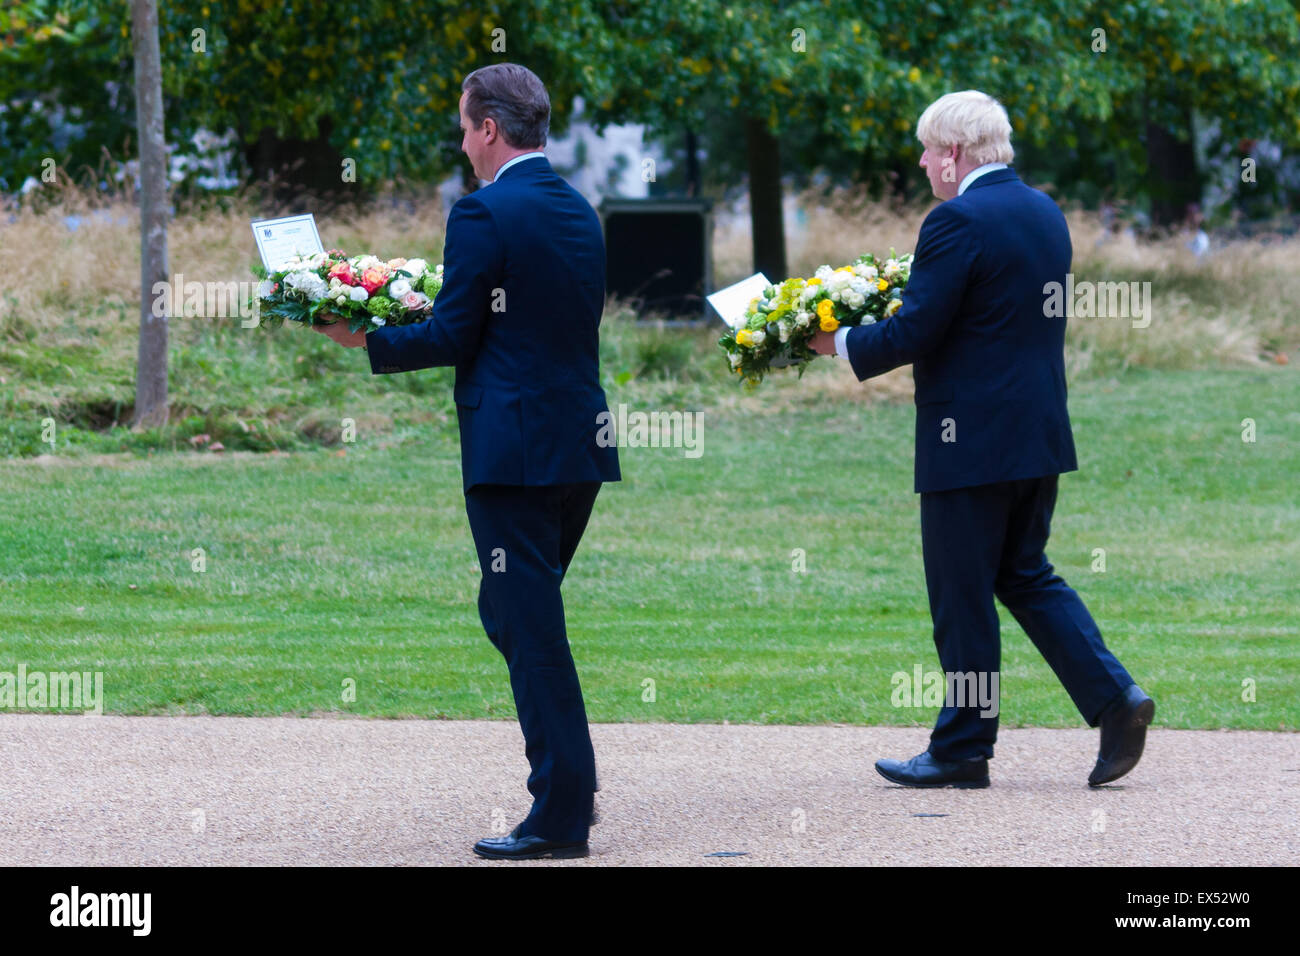 Hyde Park, London, July7th 2015. The Mayor of London Boris Johnson and other senior political figures, the Commissioners for transport and policing in the capital, as well as senior representatives of the emergency services lay wreaths at the 7/7 memorial in Hyde Park. PICTURED: Prime Minister David Cameron and Mayor of London Boris Johnson prepare to lay their wreaths. Credit:  Paul Davey/Alamy Live News Stock Photo